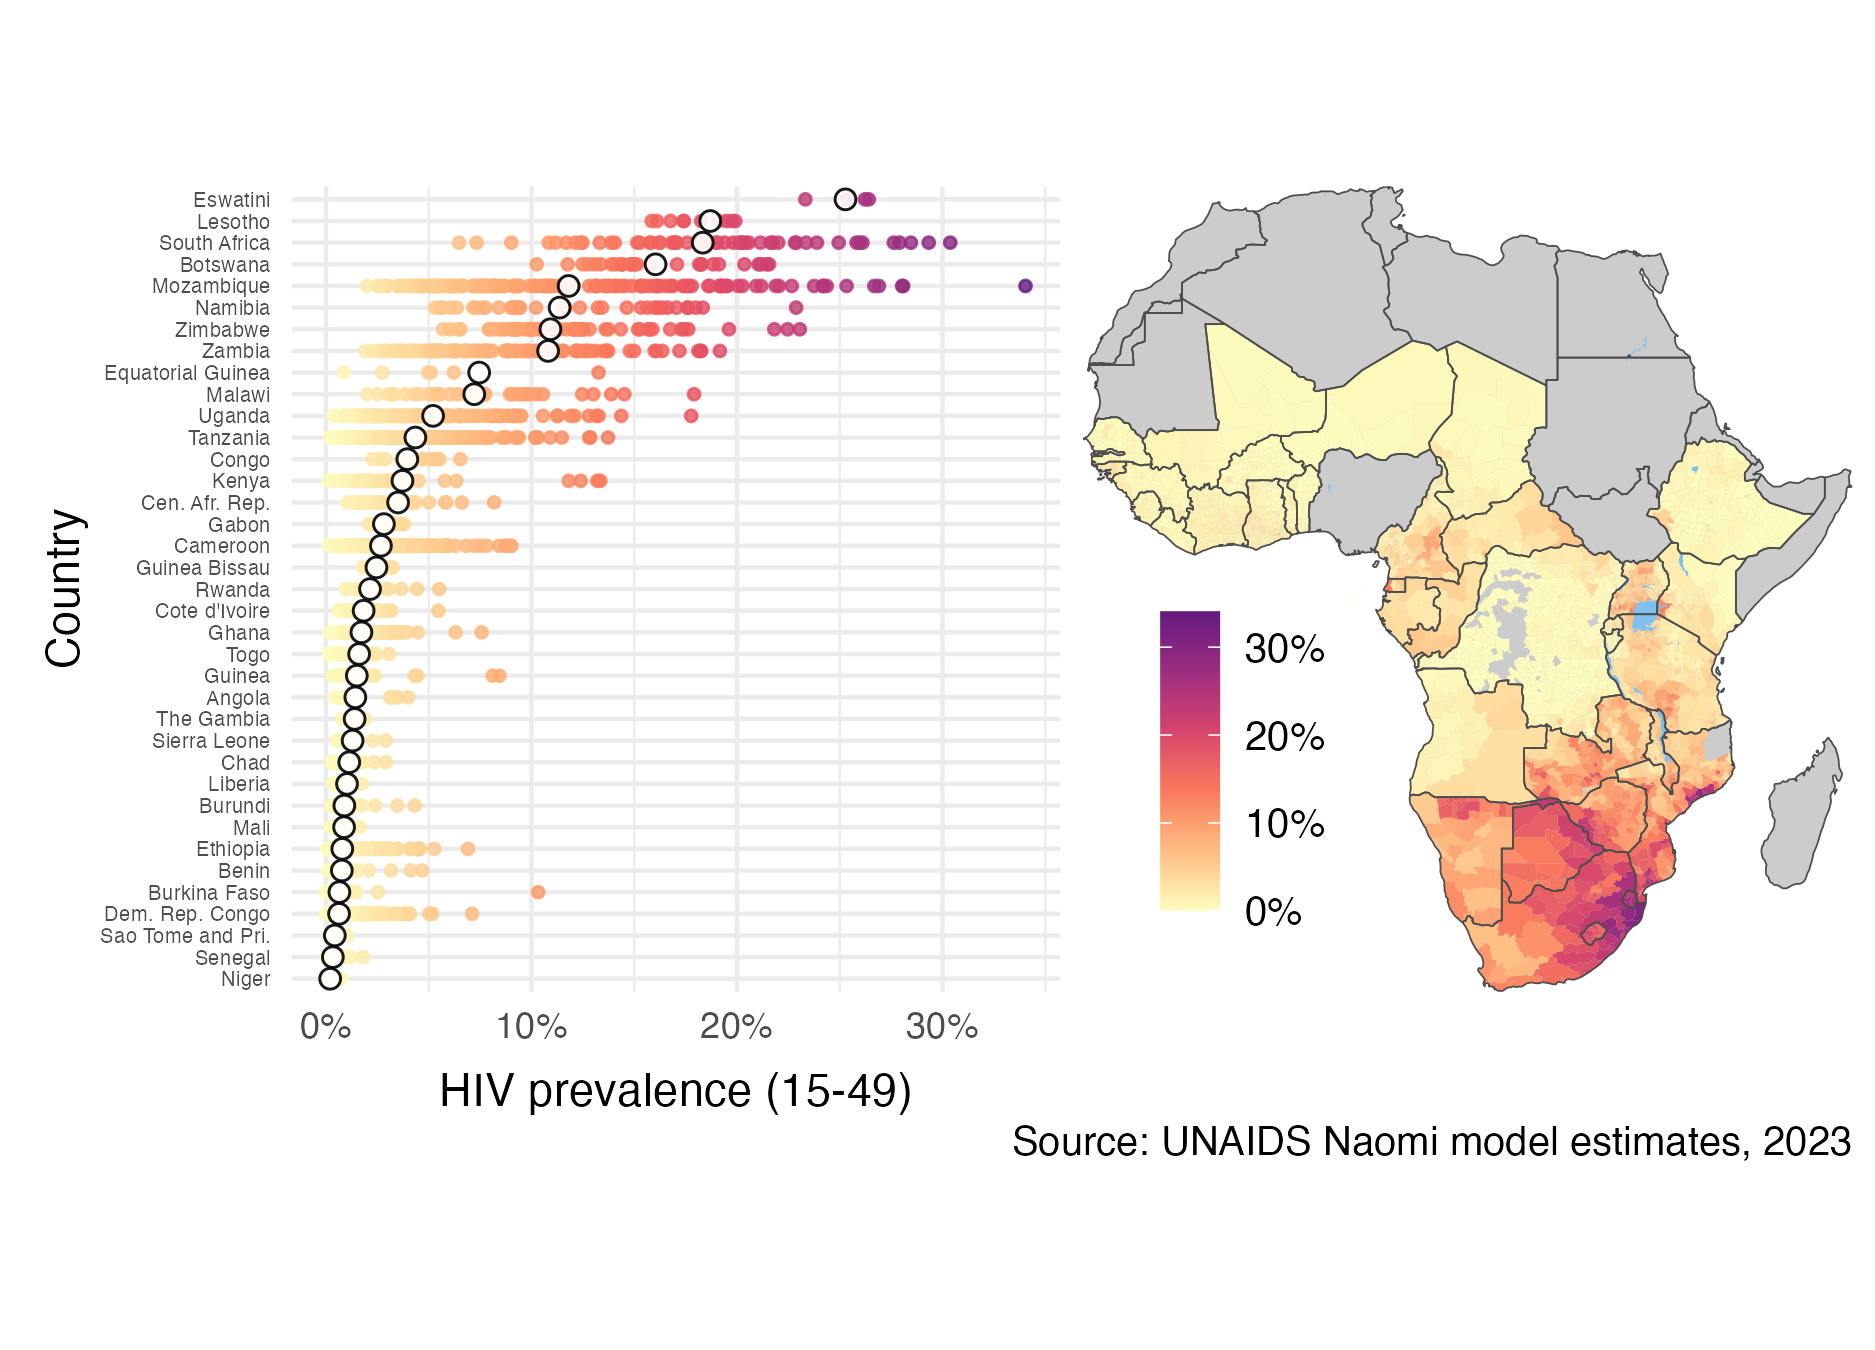 Adult (15-49) HIV prevalence varies substantially both within and between countries in SSA. The estimates from 2023 were generated by country teams using the Naomi small-area estimation model in a process supported by UNAIDS, and are available from UNAIDS (2023a). White filled points are country-level estimates, and coloured points are district-level estimates. Results from Nigeria were not published. Data collection in the Cabo Delgado province of Mozambique was disrupted by conflict. Obtaining results for the Democratic Republic of the Congo required removing some districts from the model.